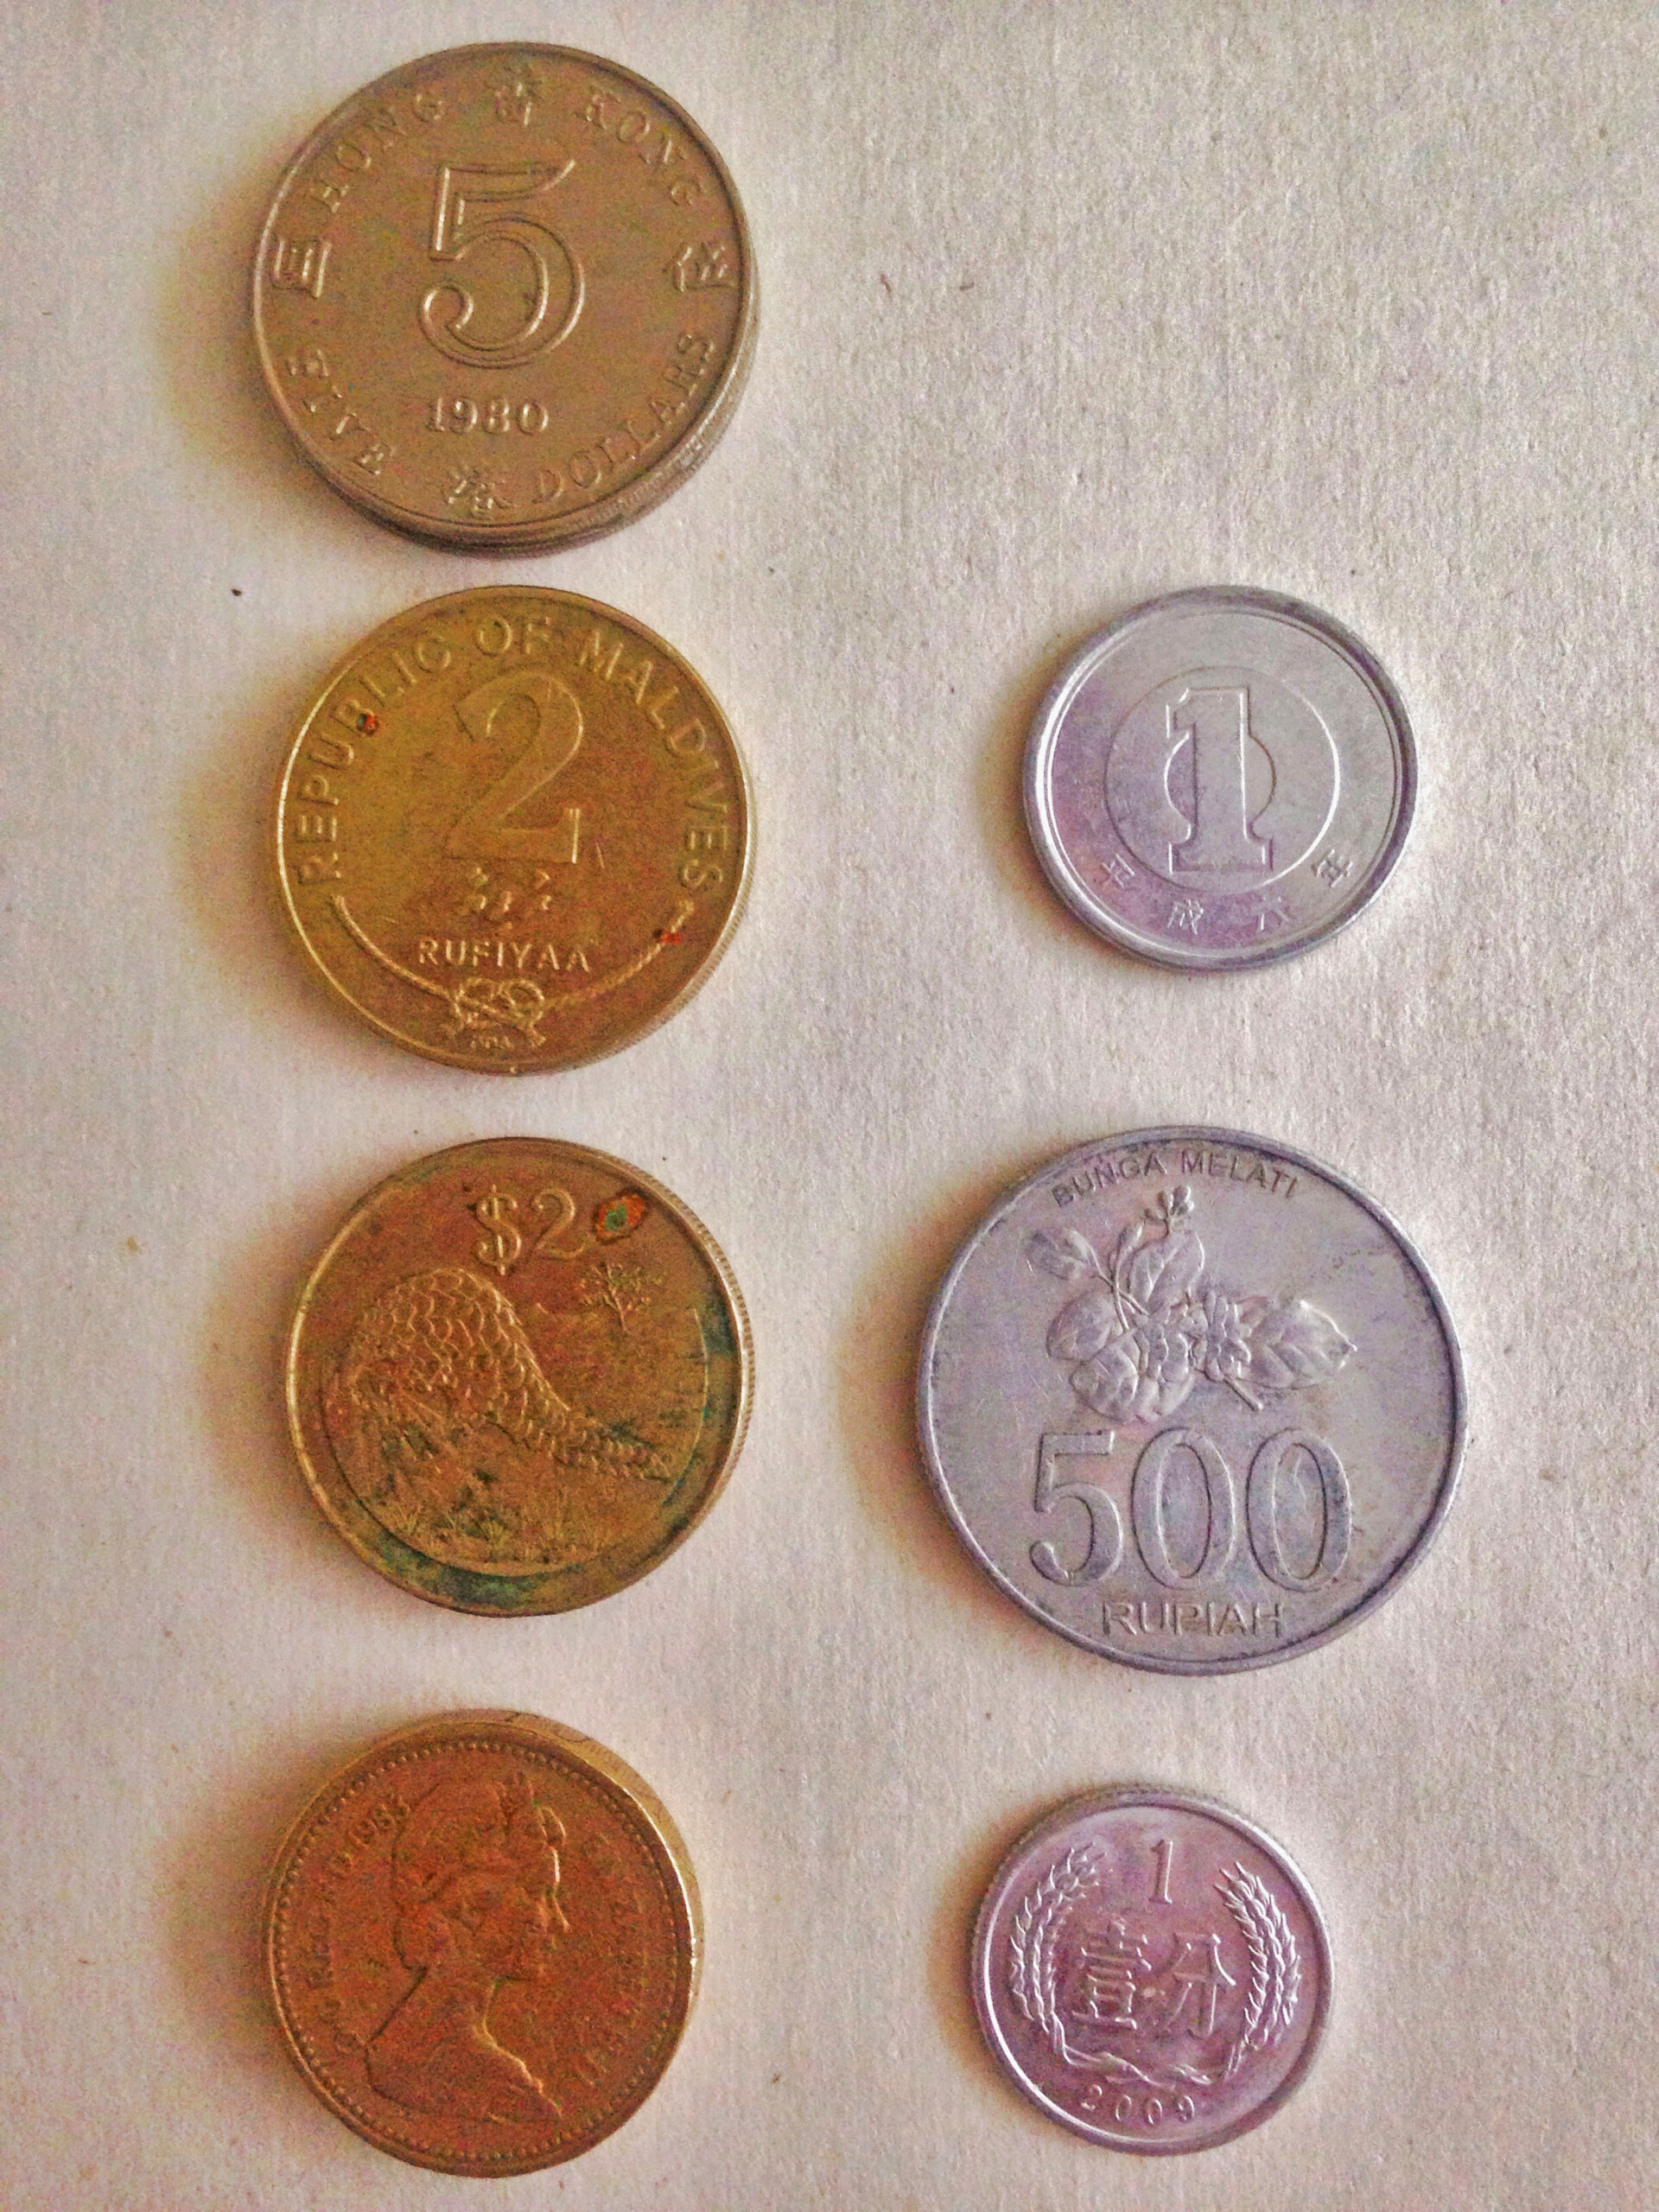 (from left to right) Heavy to Light Coins